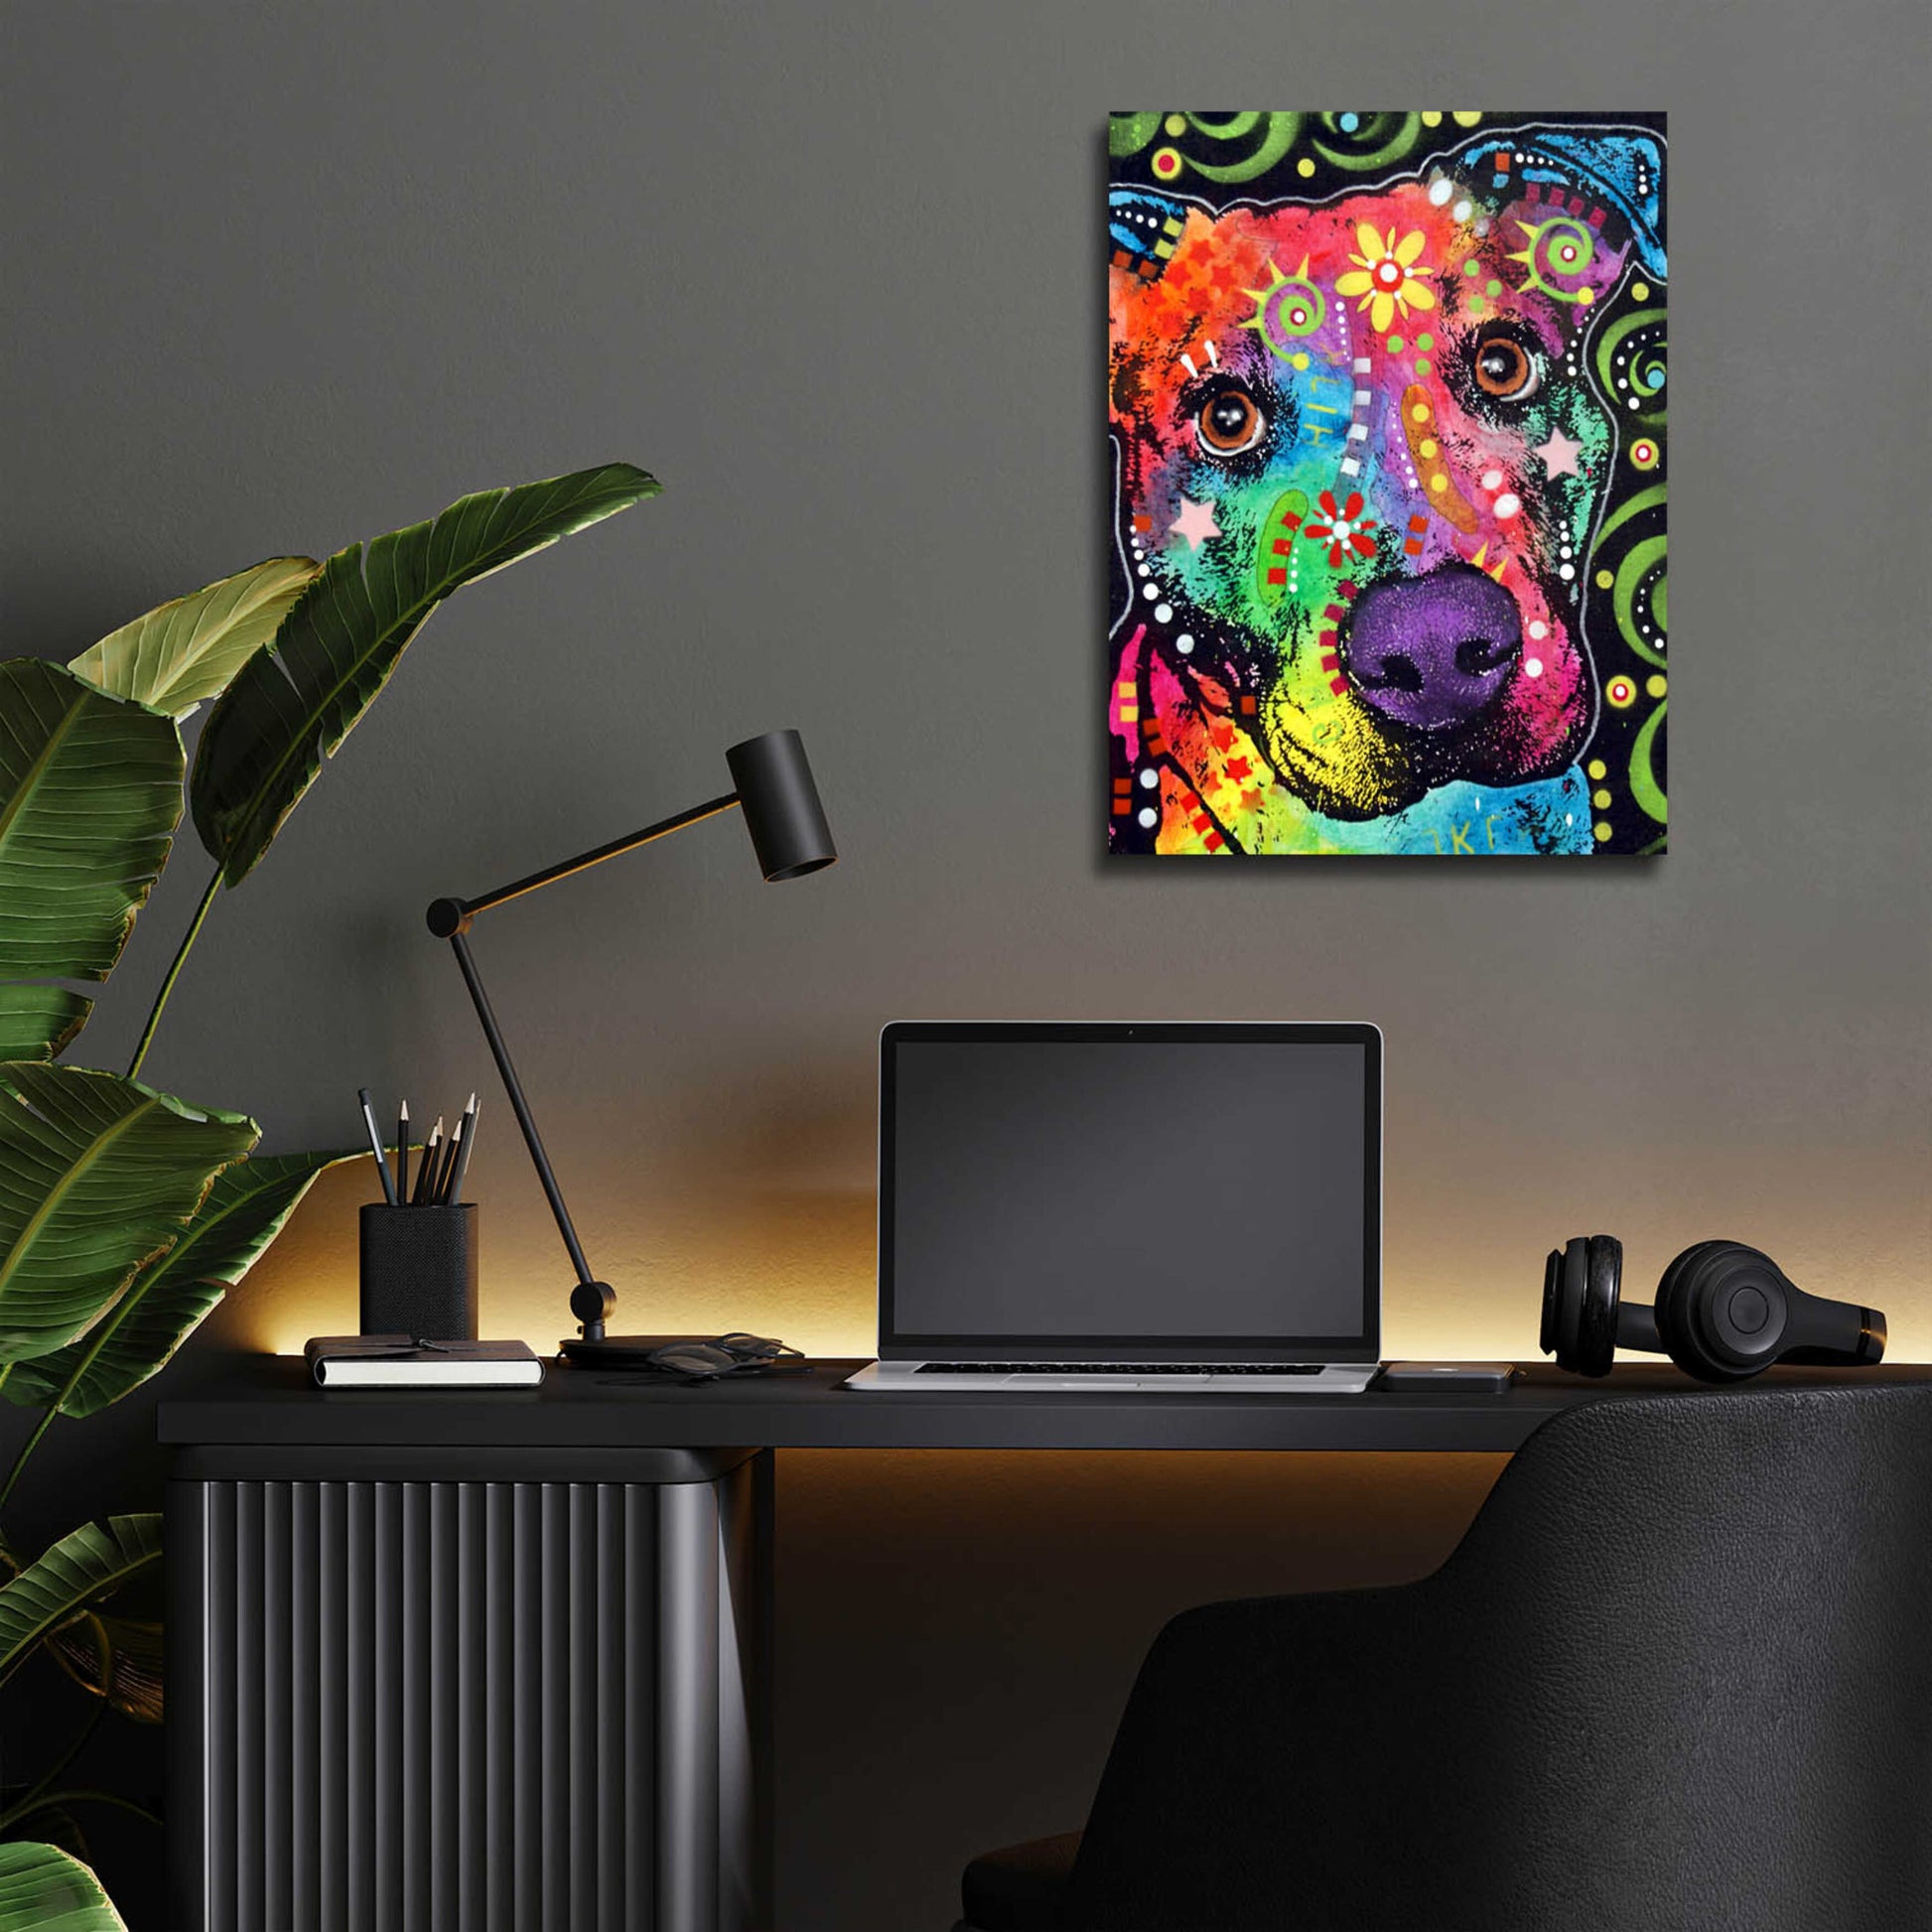 Epic Art 'Passion Pit' by Dean Russo, Acrylic Glass Wall Art,12x16